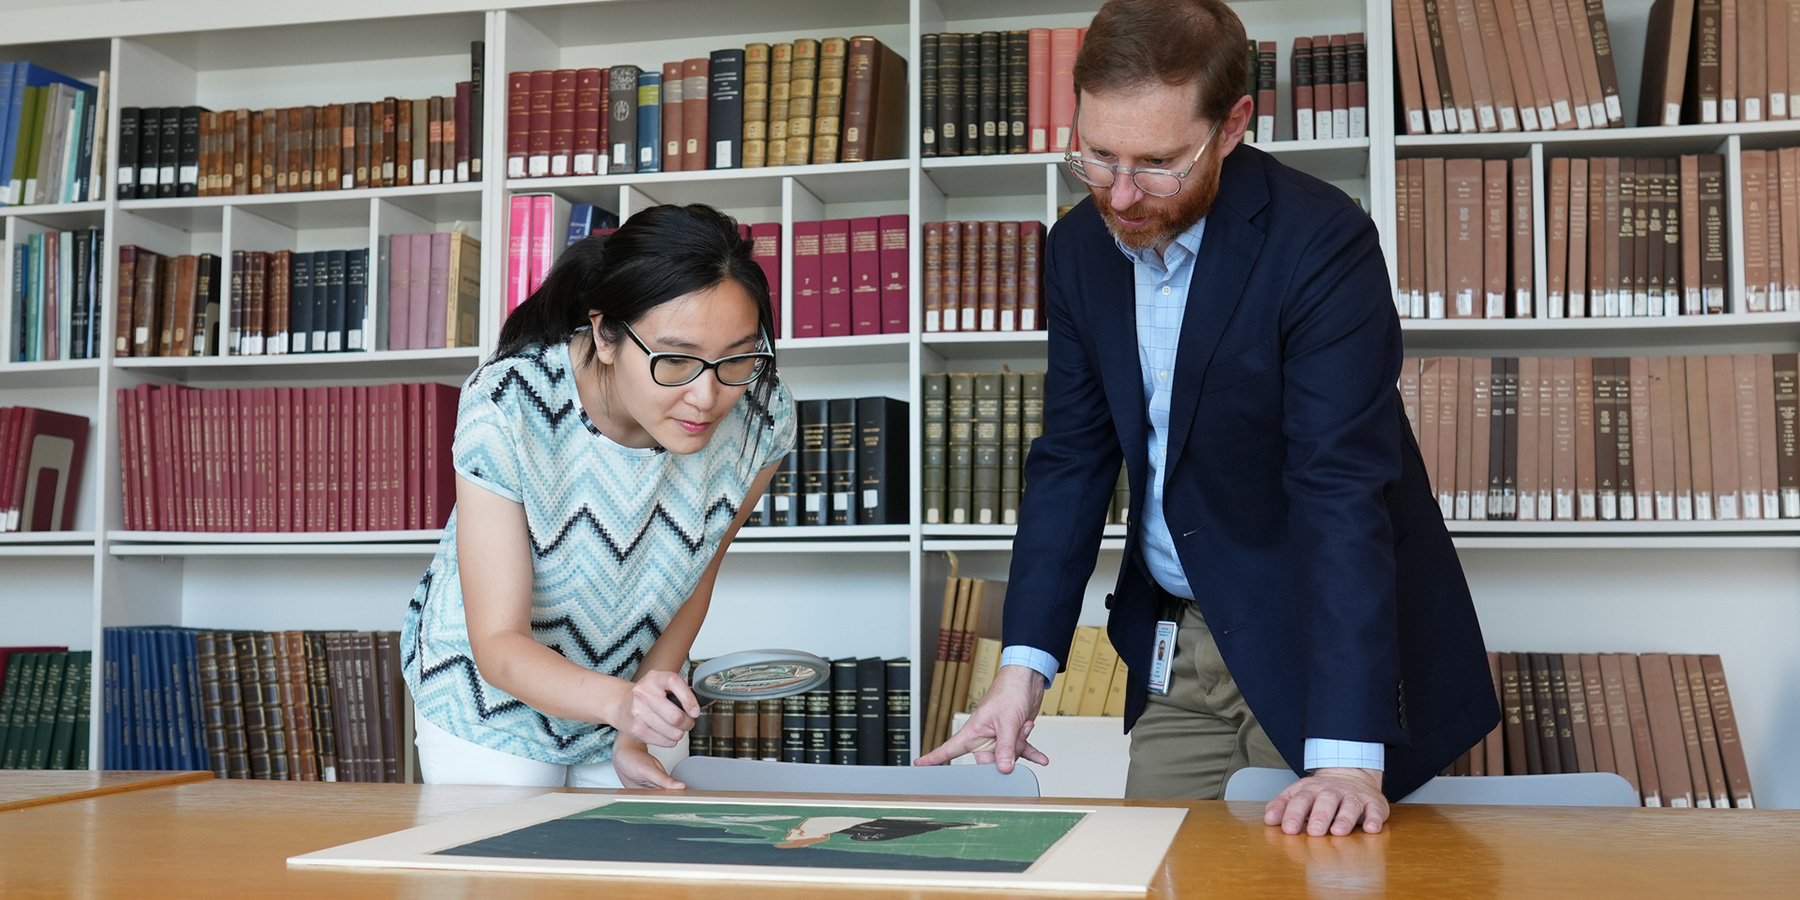 Staff and scholars view and discuss prints on display in the Study Center.